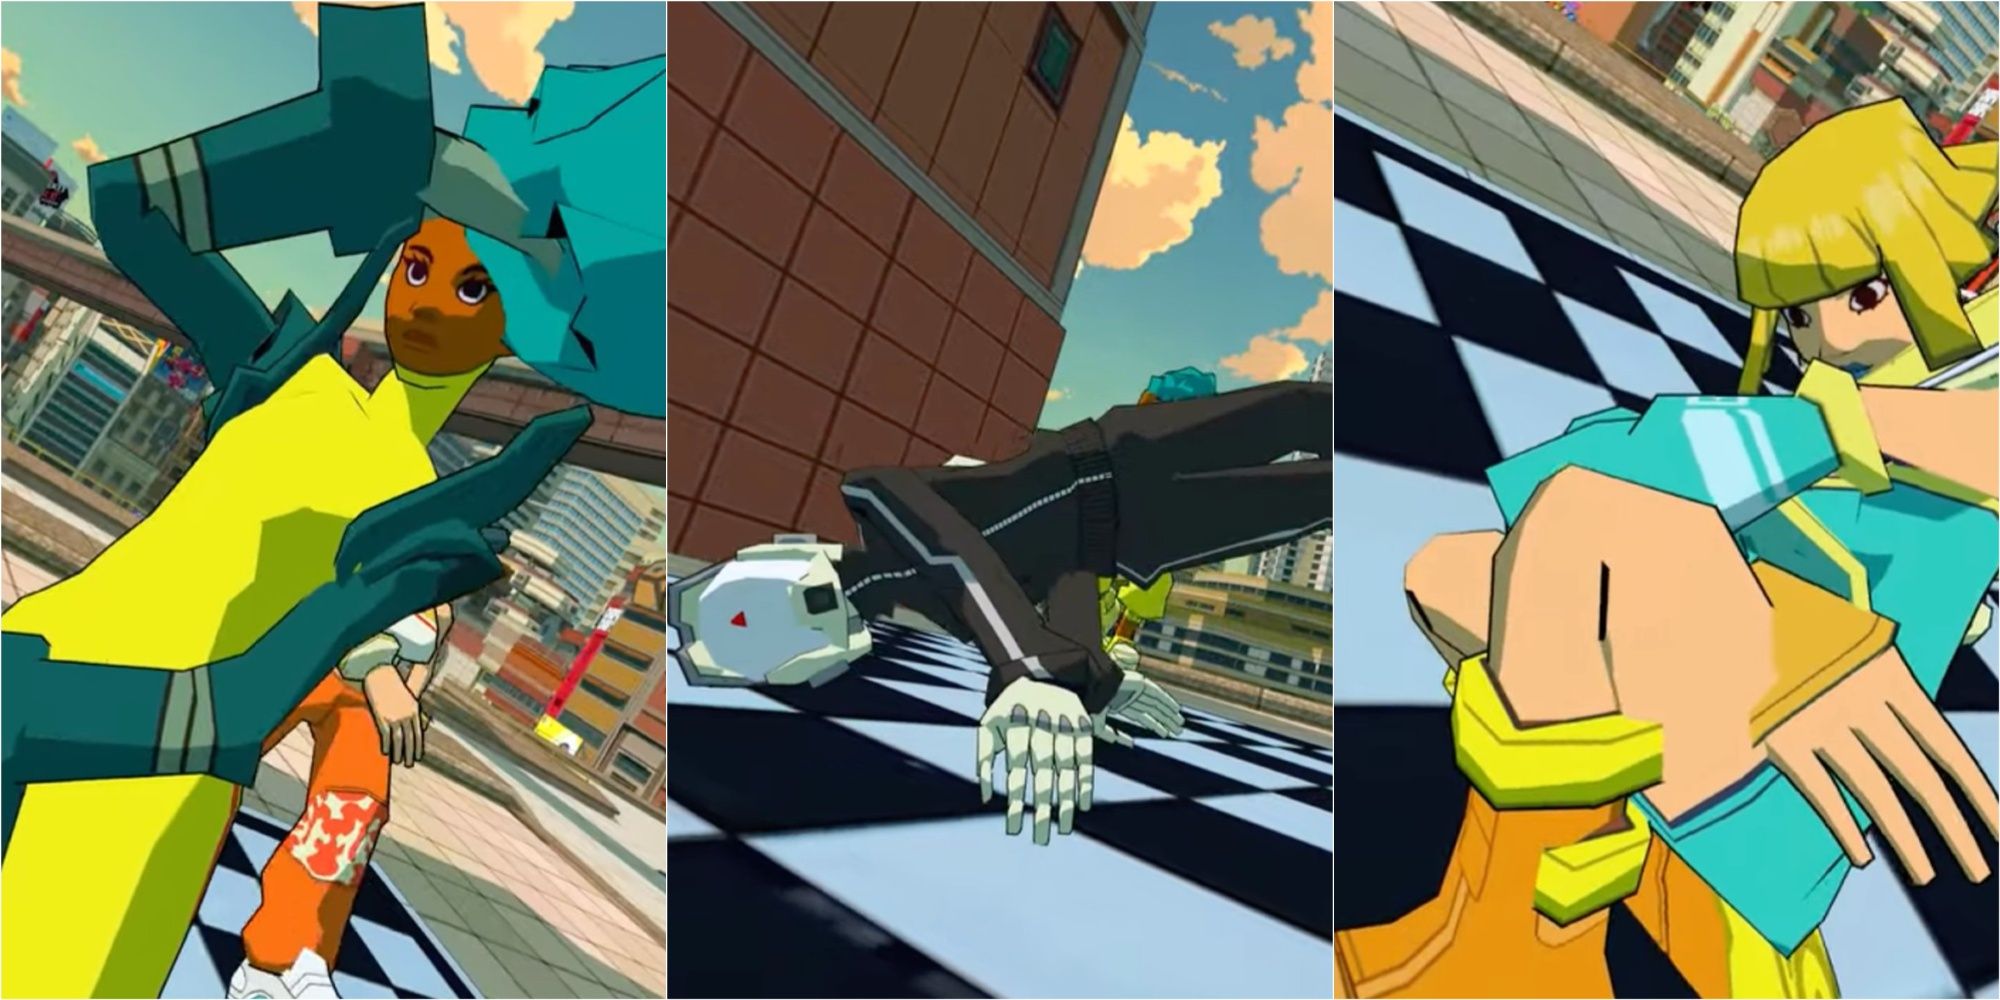 Collage image of Vinyl, DOT EXE, and Bel in Bomb Rush Cyberfunk.